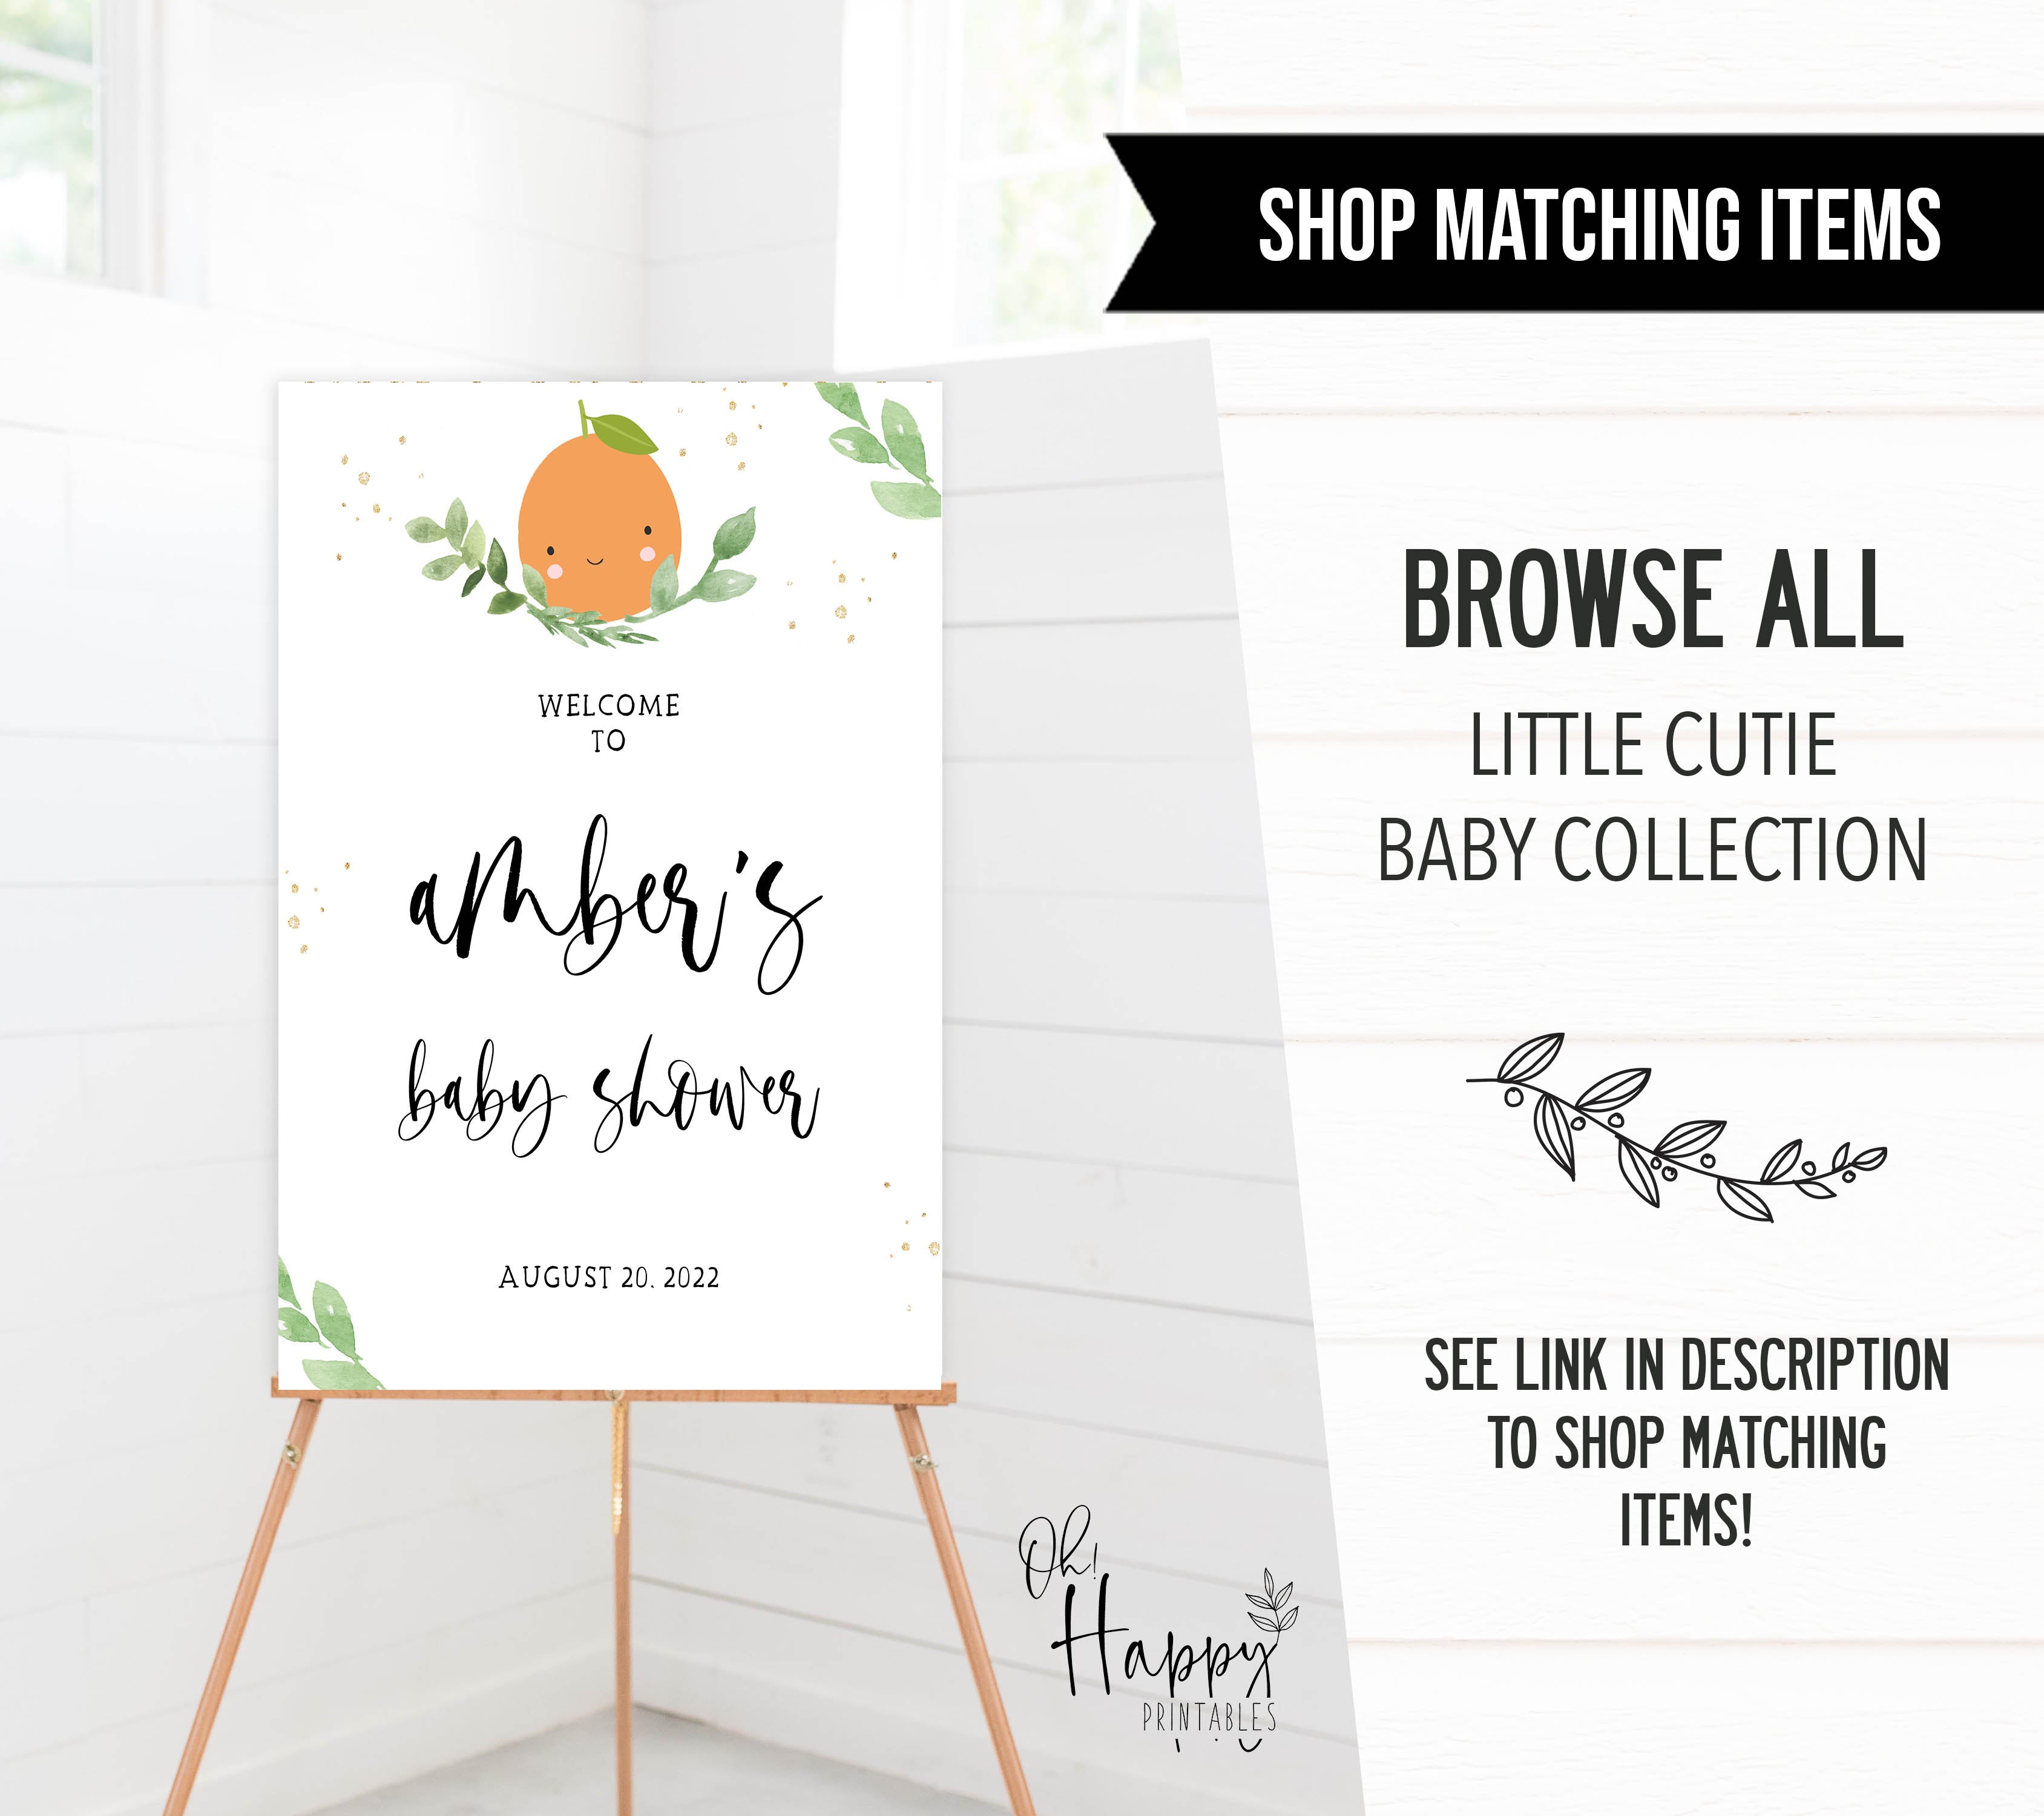 what am I baby game, Printable baby shower games, little cutie baby games, baby shower games, fun baby shower ideas, top baby shower ideas, little cutie baby shower, baby shower games, fun little cutie baby shower ideas